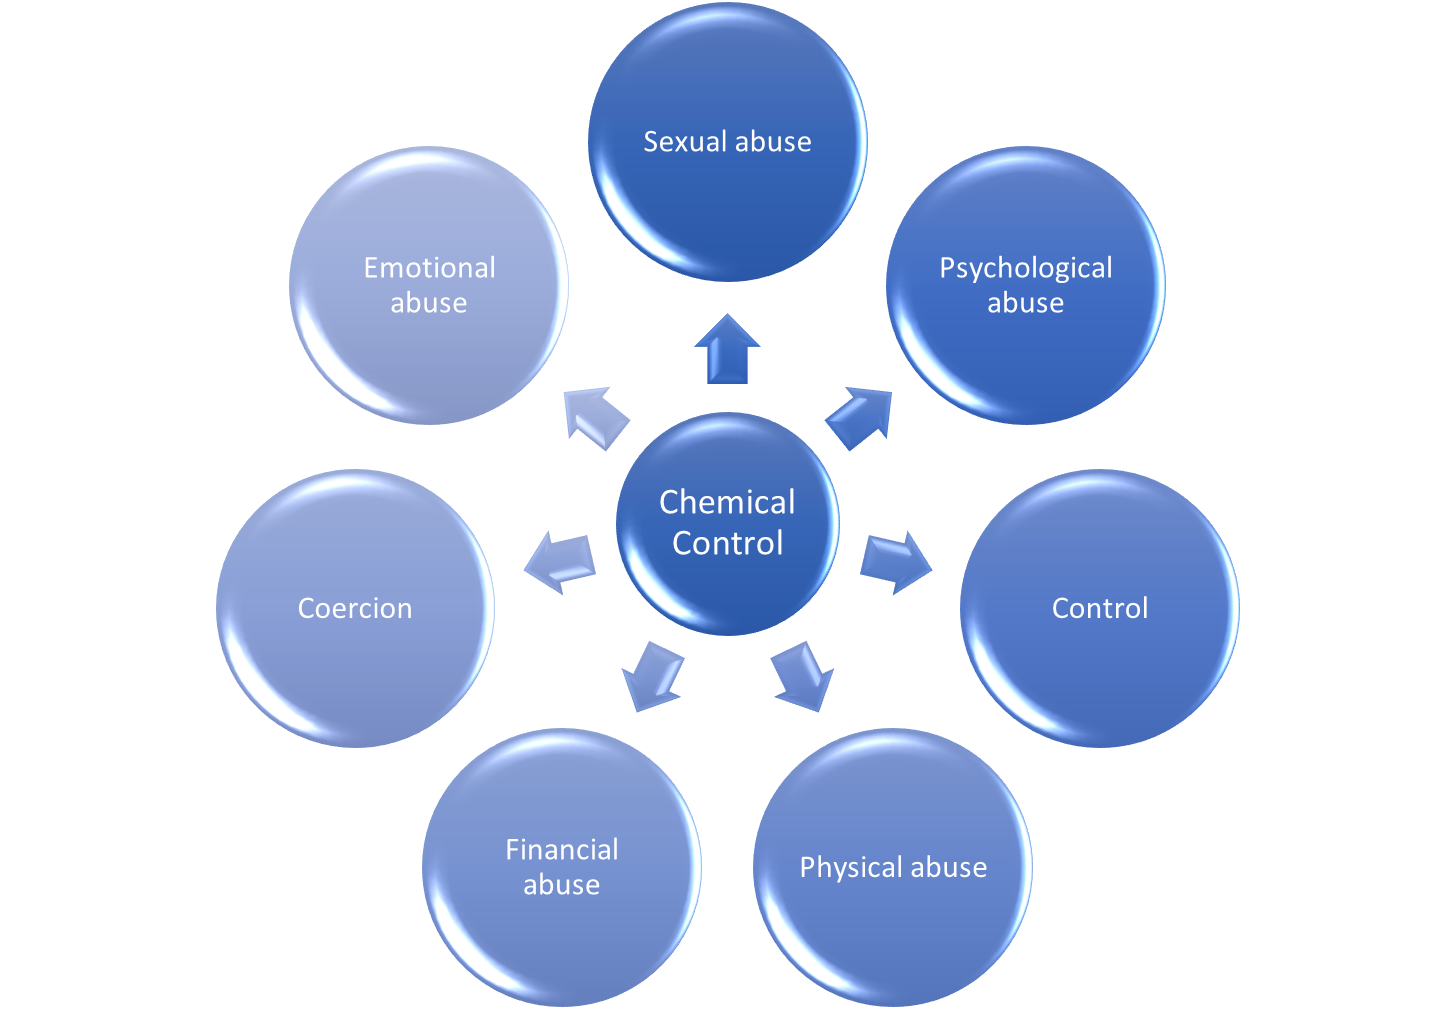 Diagram showing various ways chemical control can facilitate different types of domestic abuse; emotional abuse, coercion, financial abuse, physical abuse, control, psychological abuse, sexual abuse